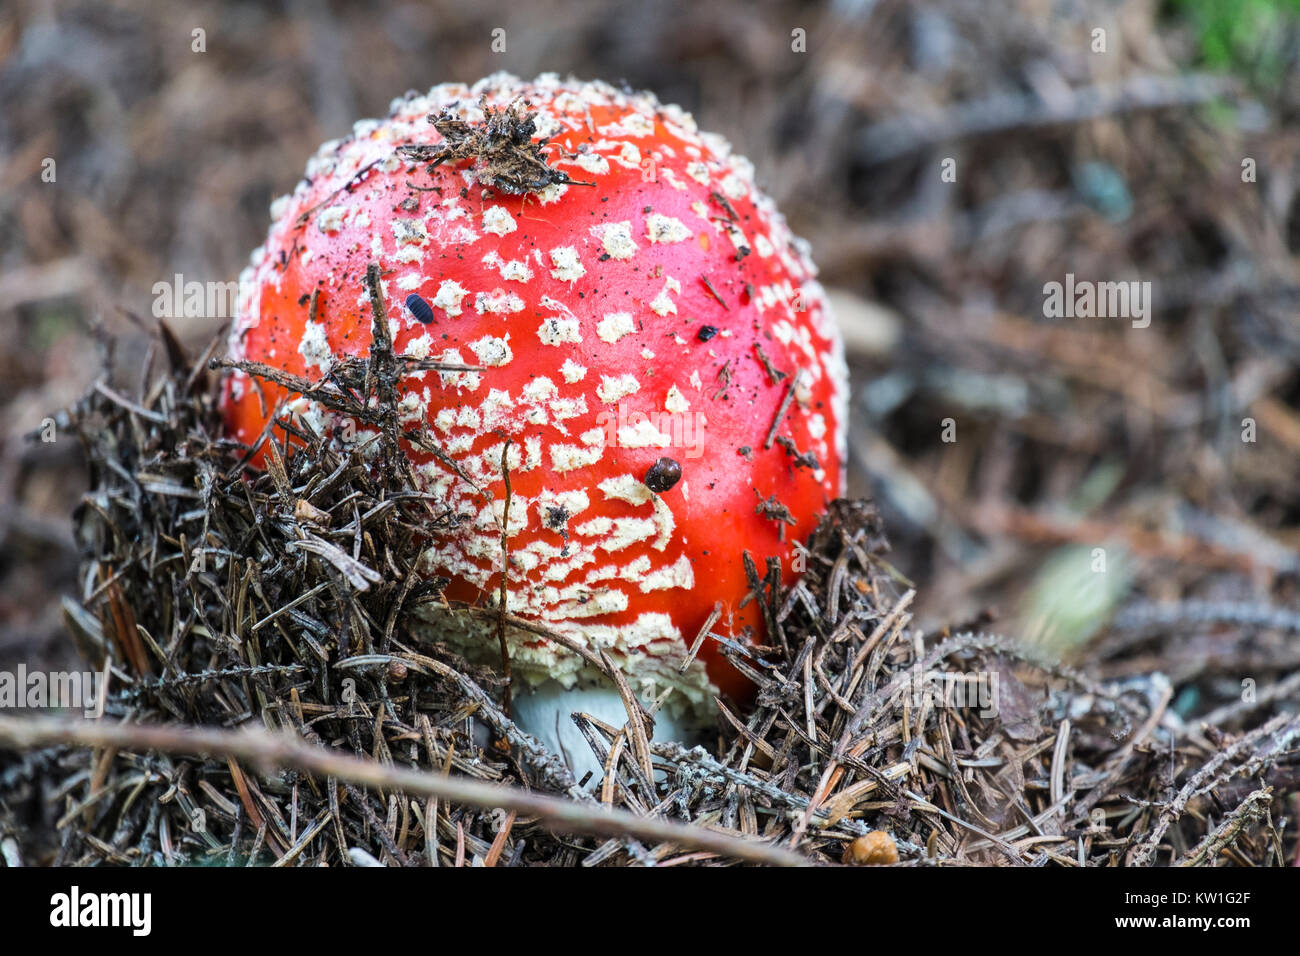 Red fly agaric makes its way out of the ground (Amanita muscaria) Stock Photo